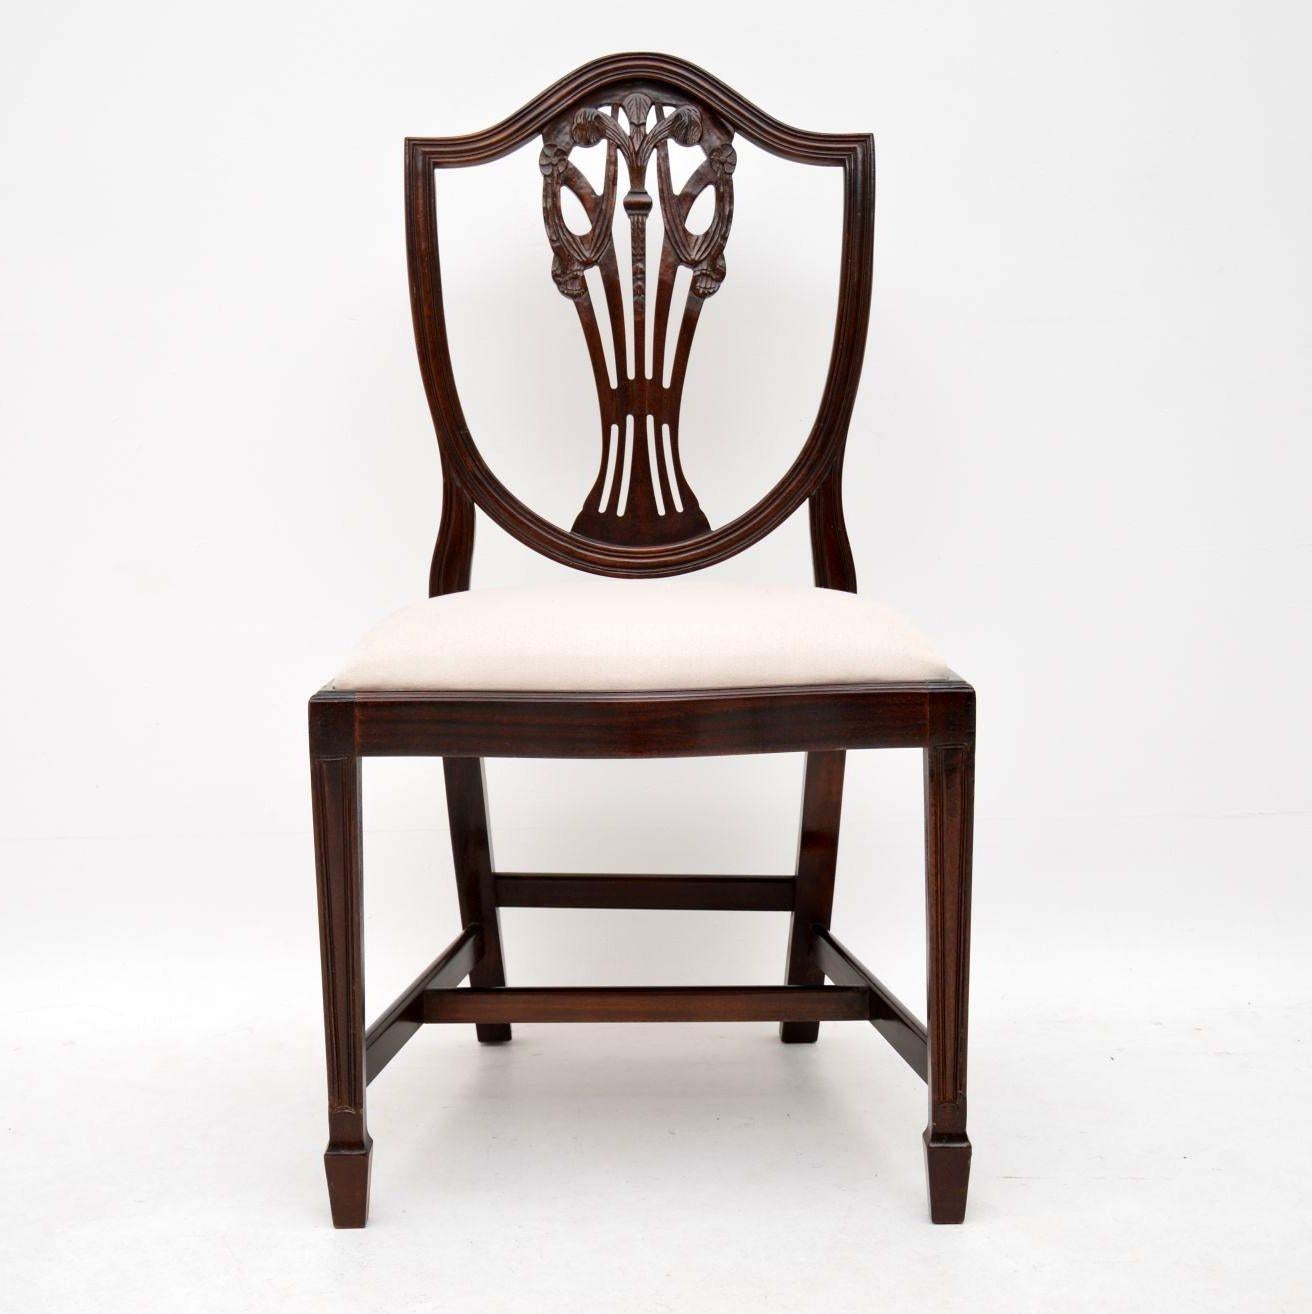 Set of eight antique Sheraton style dining chairs in mahogany including two with arms. They are in good condition, having just been French polished and I would date them to circa 1930s-1950s period. The drop in seats have just been re-upholstered in